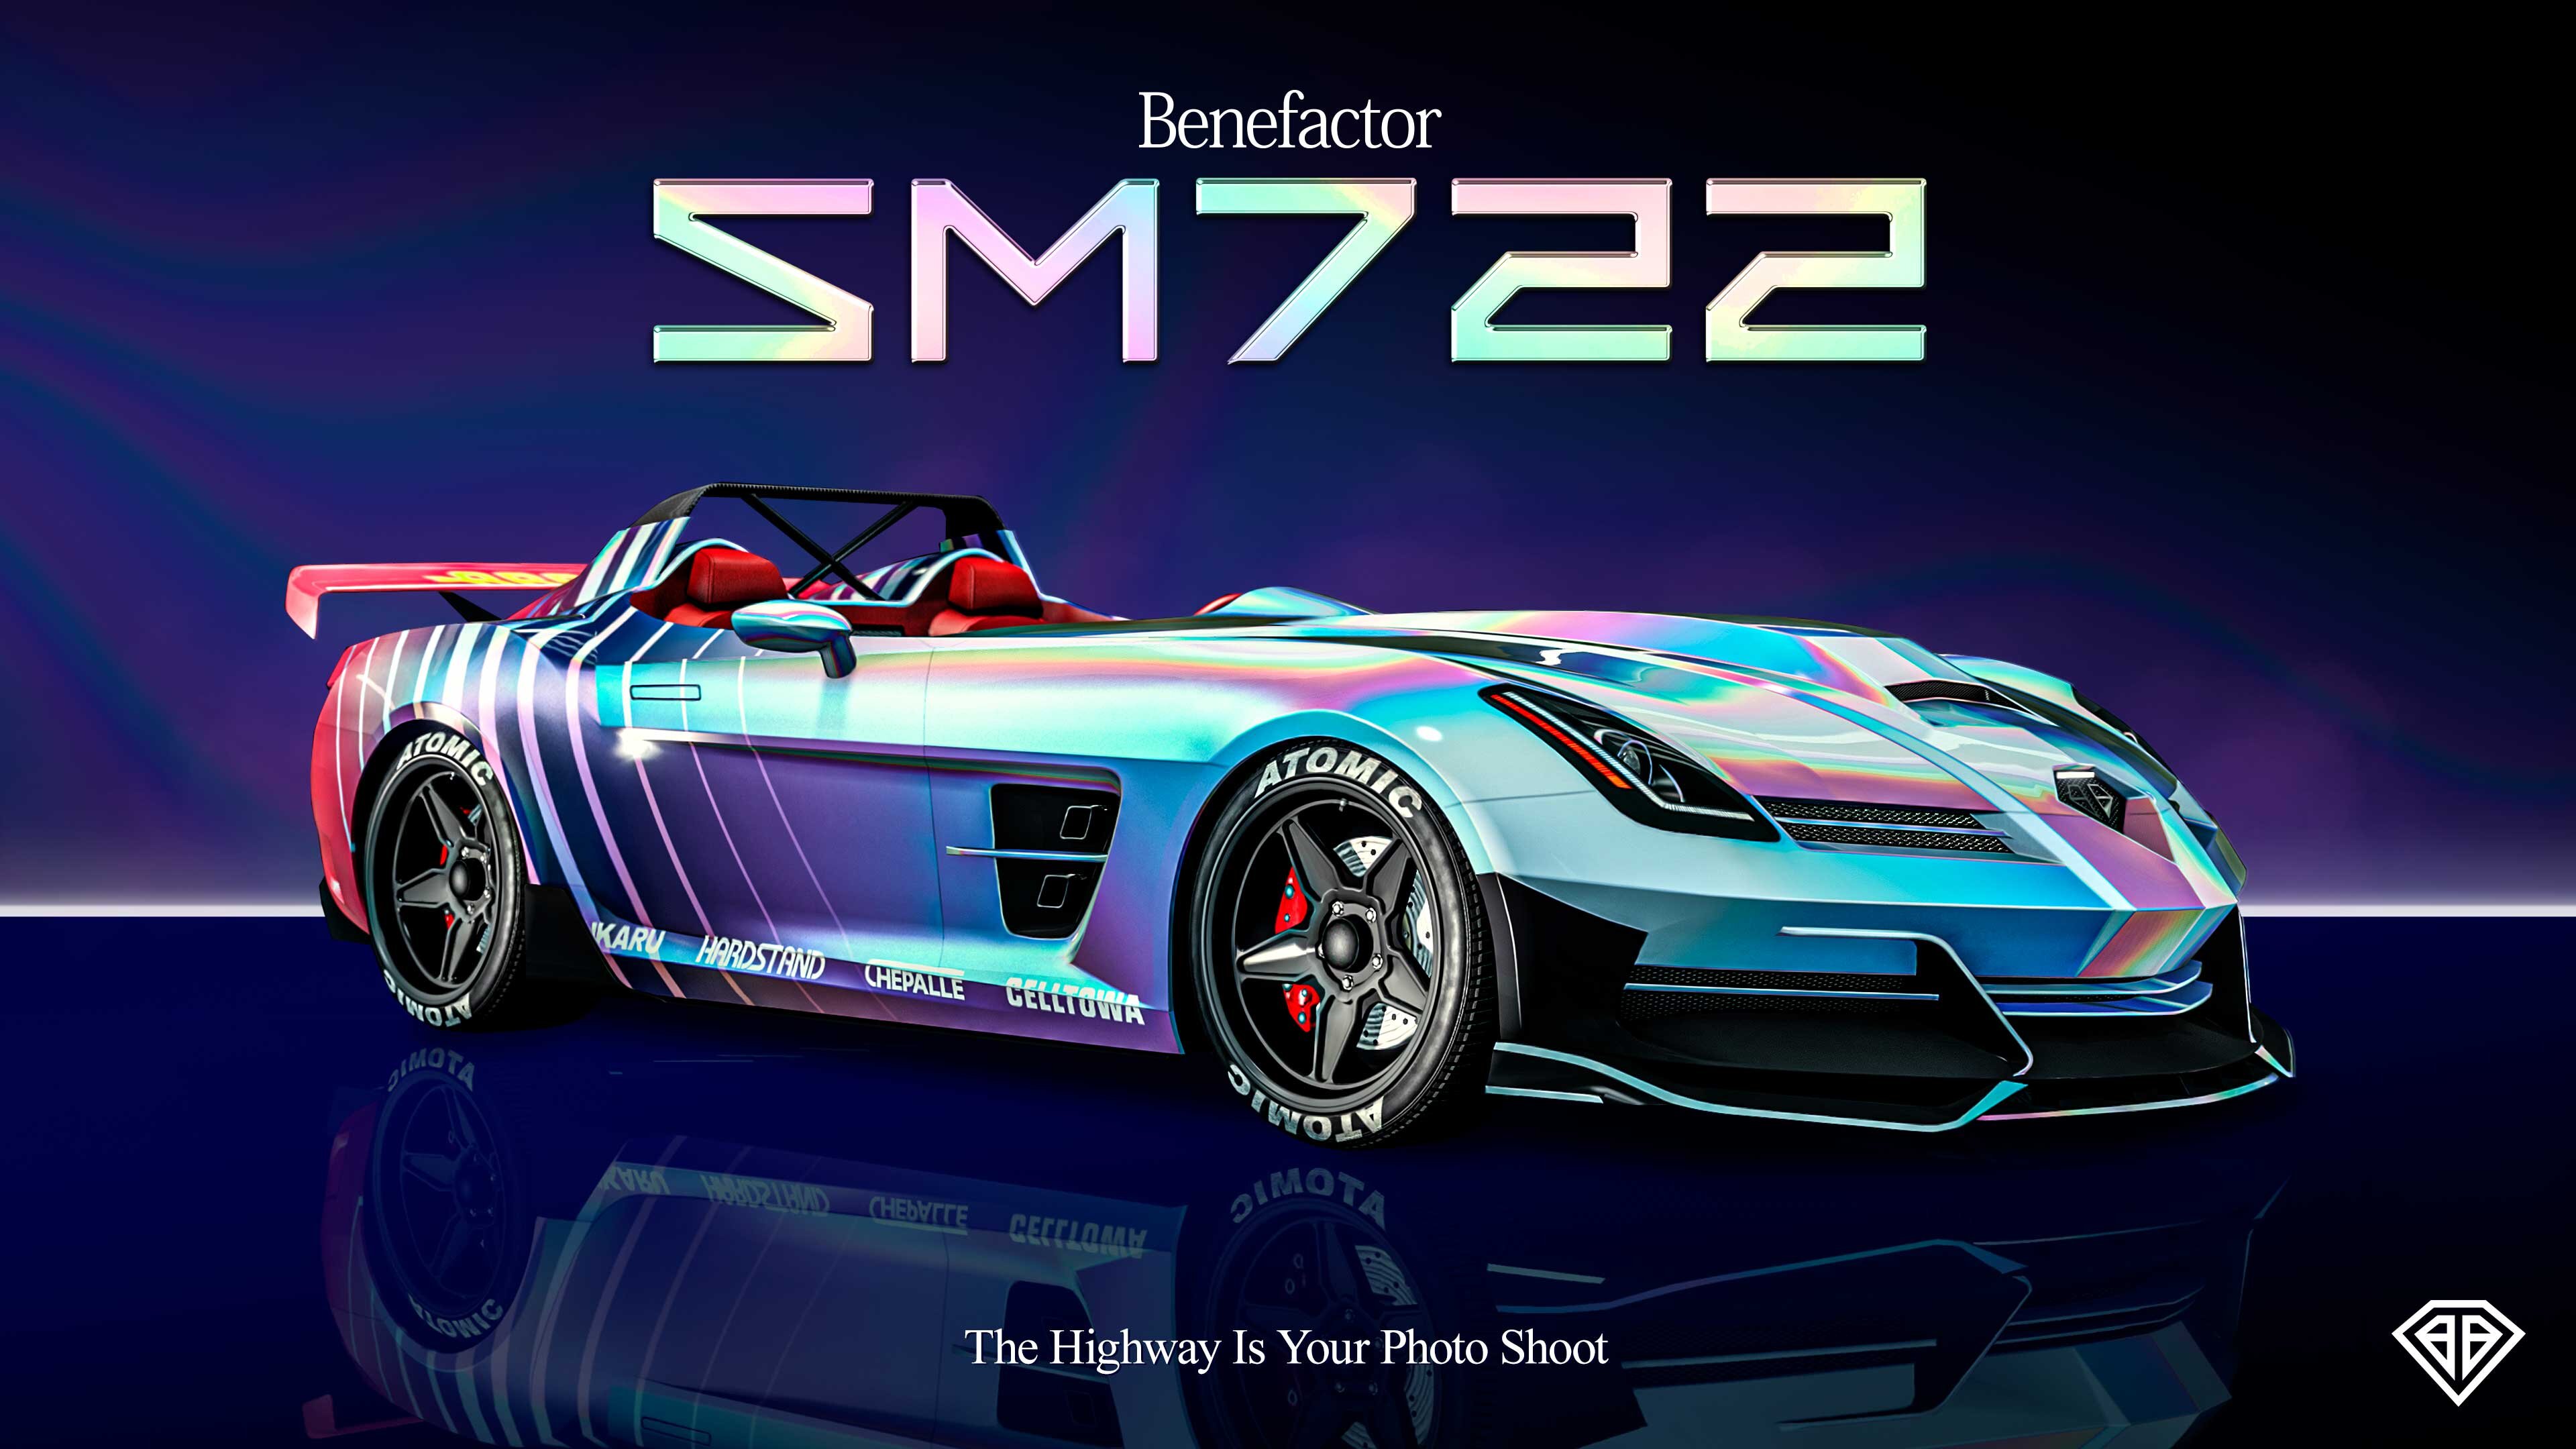 More information about "Benefactor SM722 & Car Showrooms in GTA Online"